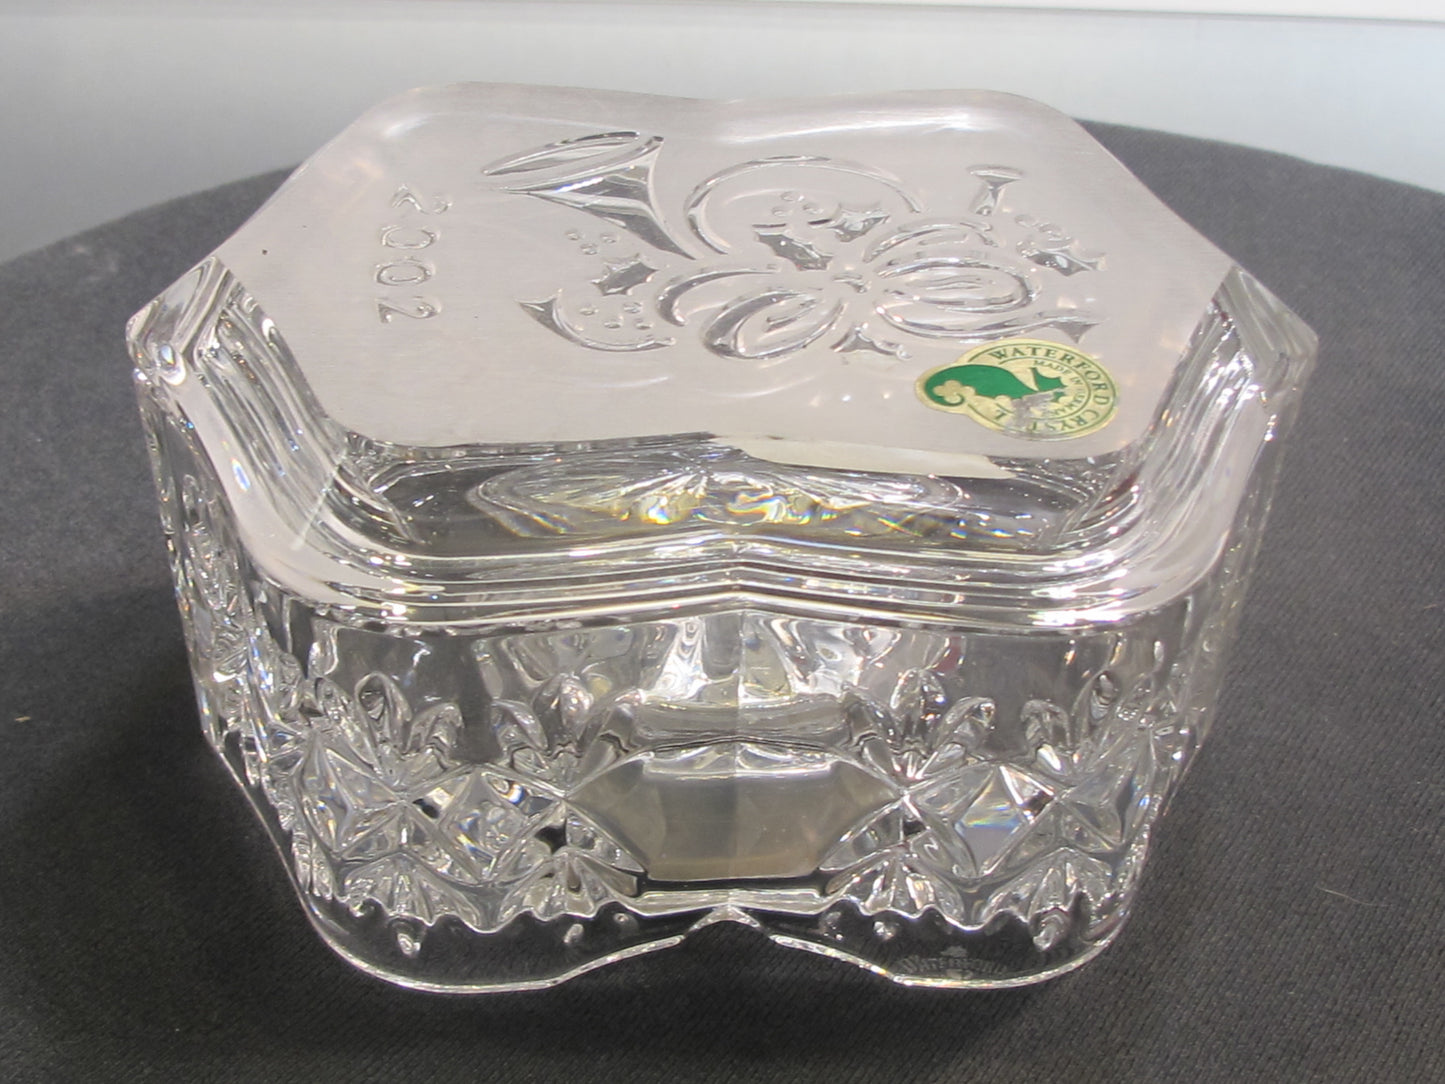 Songs of Christmas 2002 Signed Waterford crystal music box lid